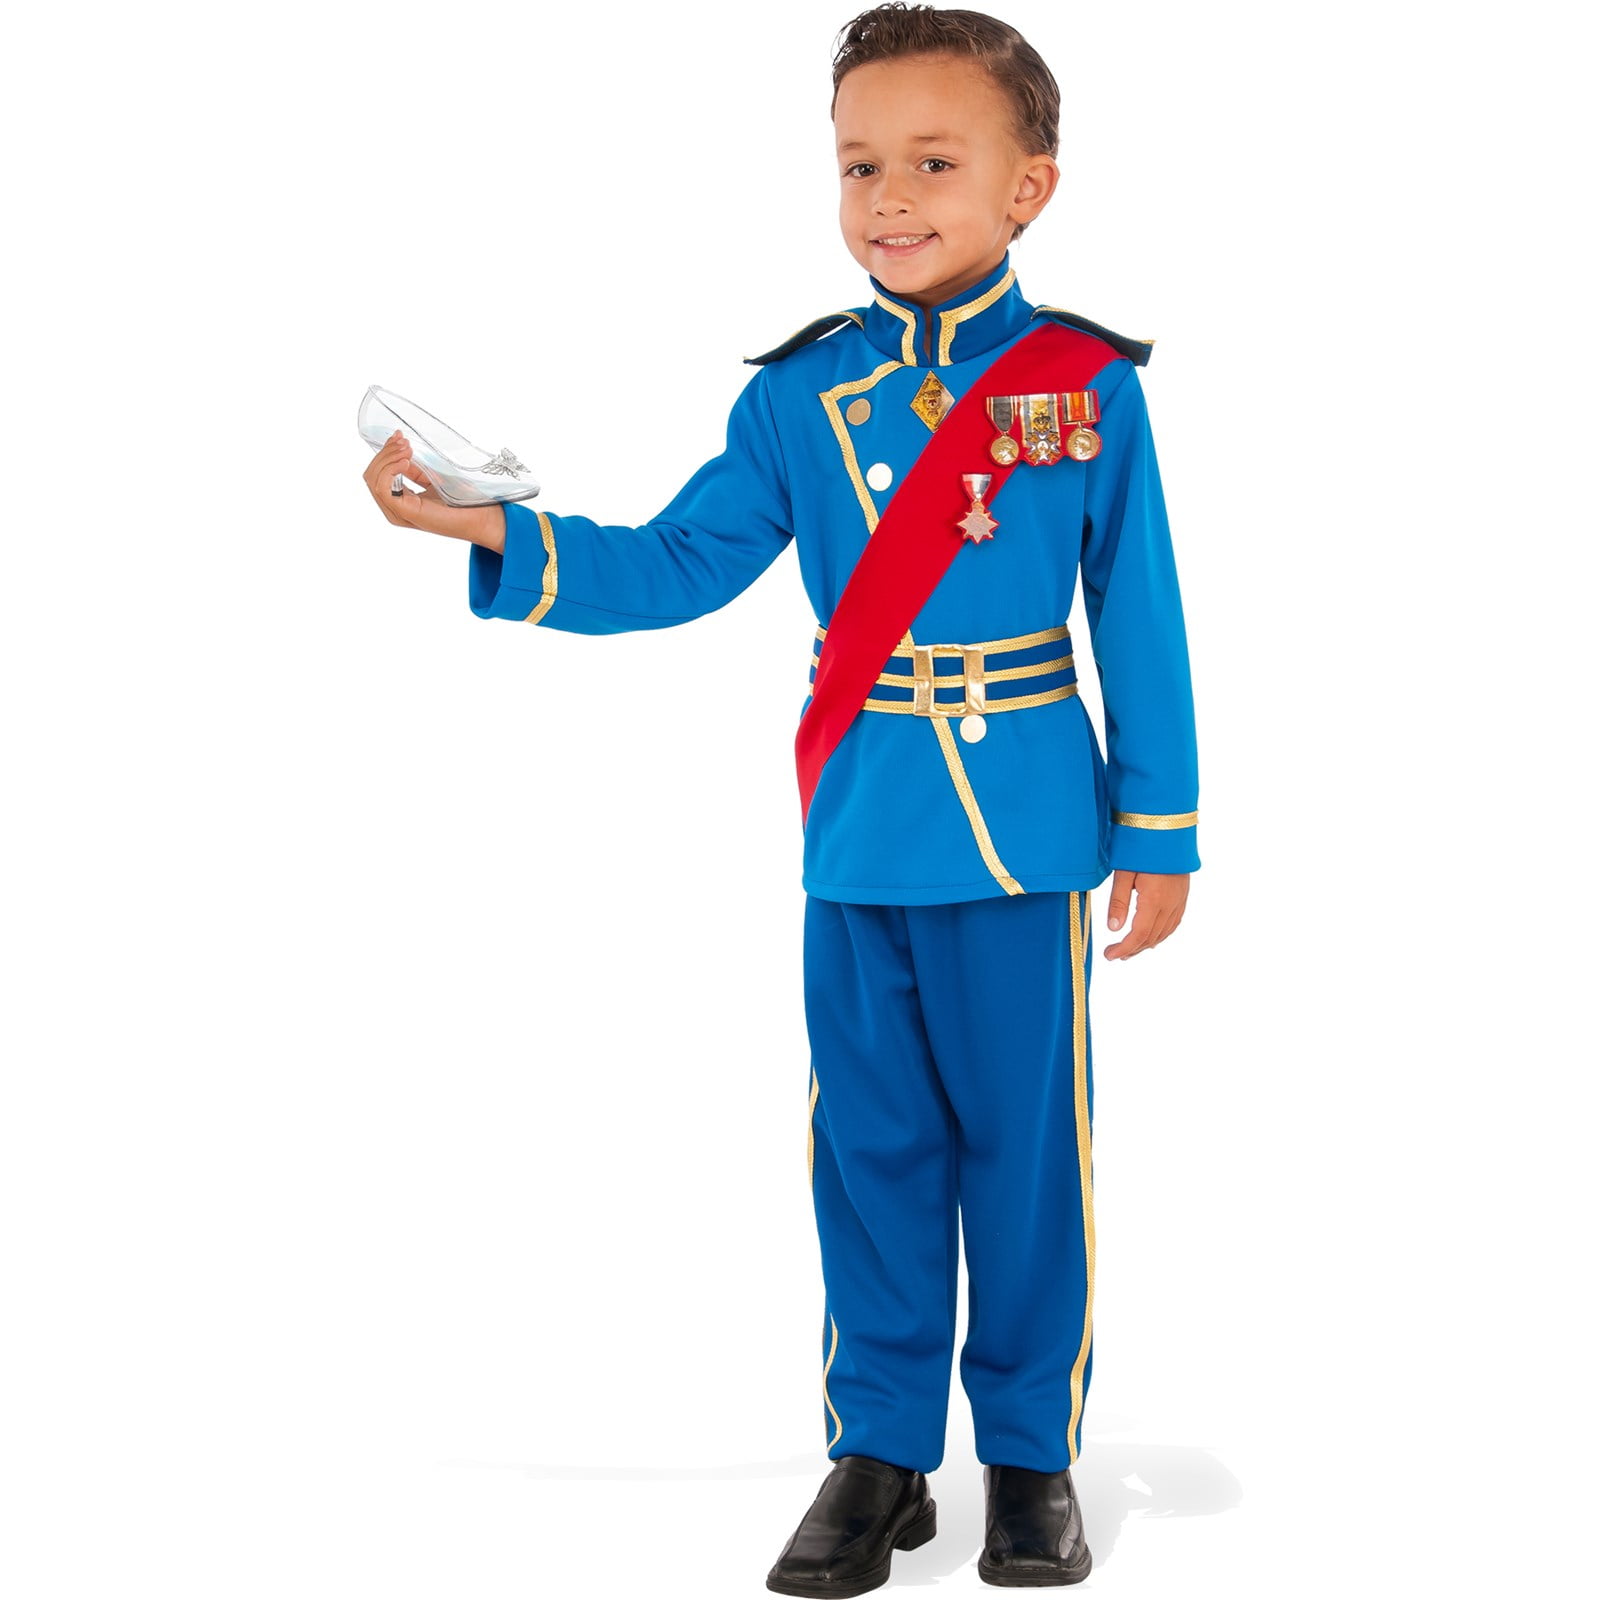 Royal Prince Costume For Boys Prince Charming Costume By Dress up America